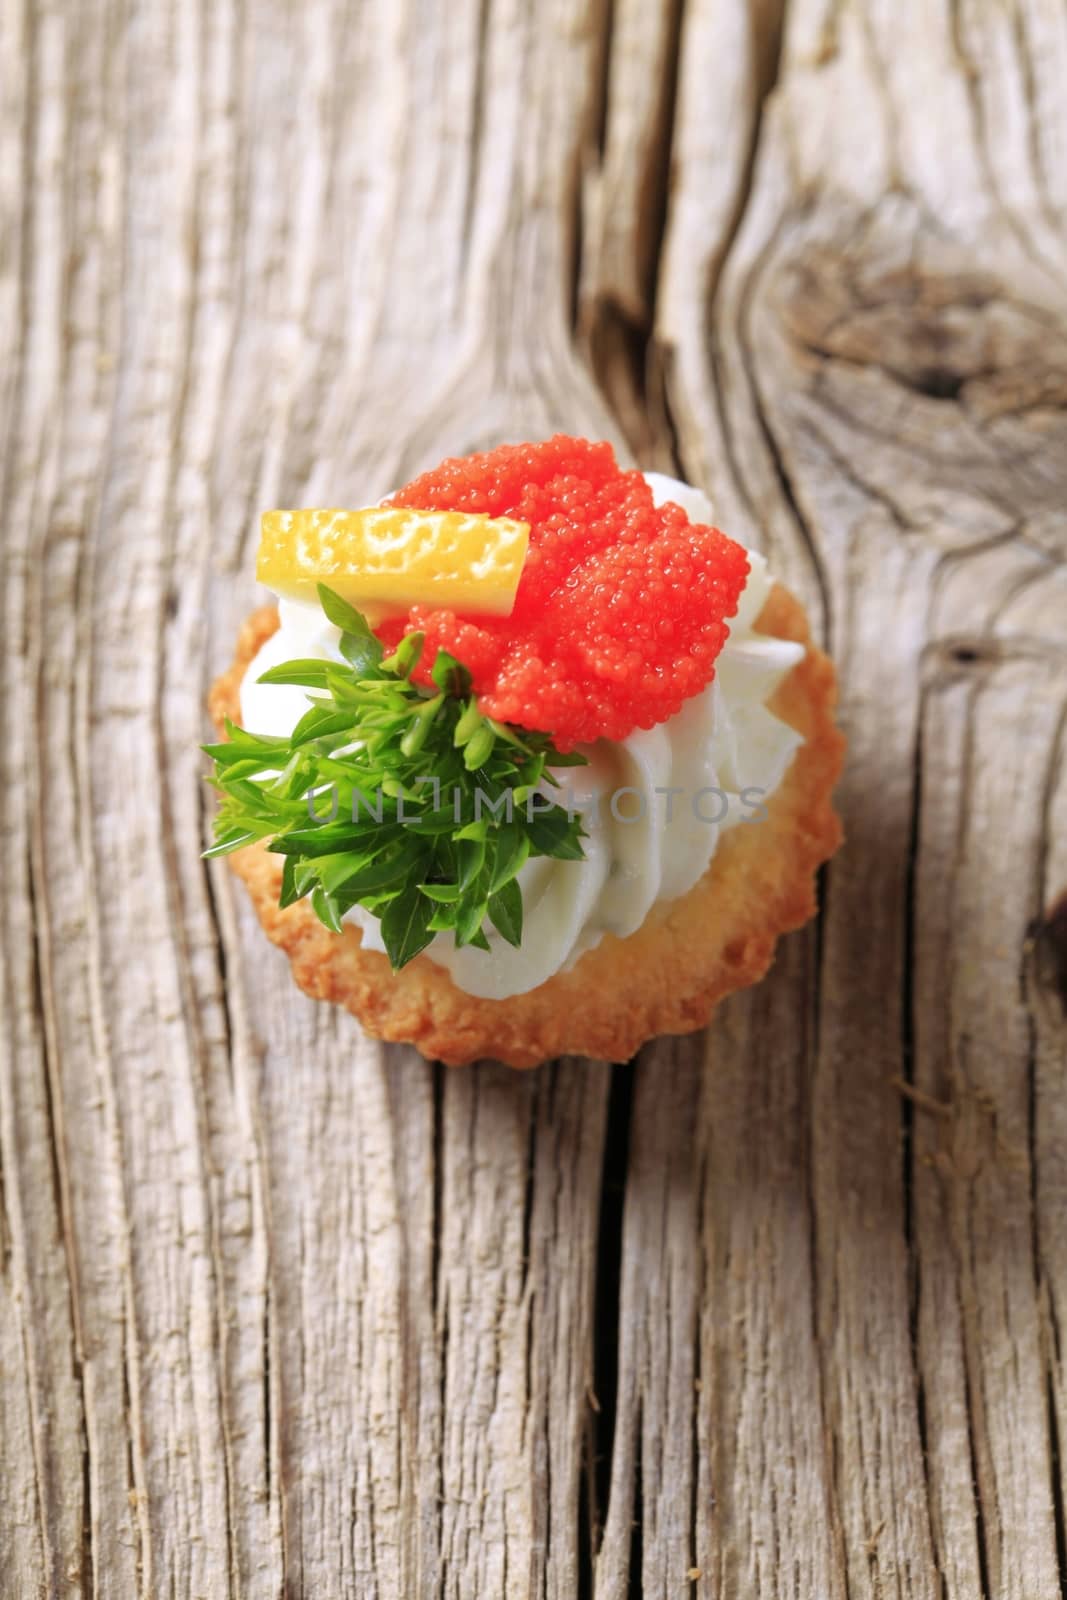 Tart pastry with savory spread topping - detail